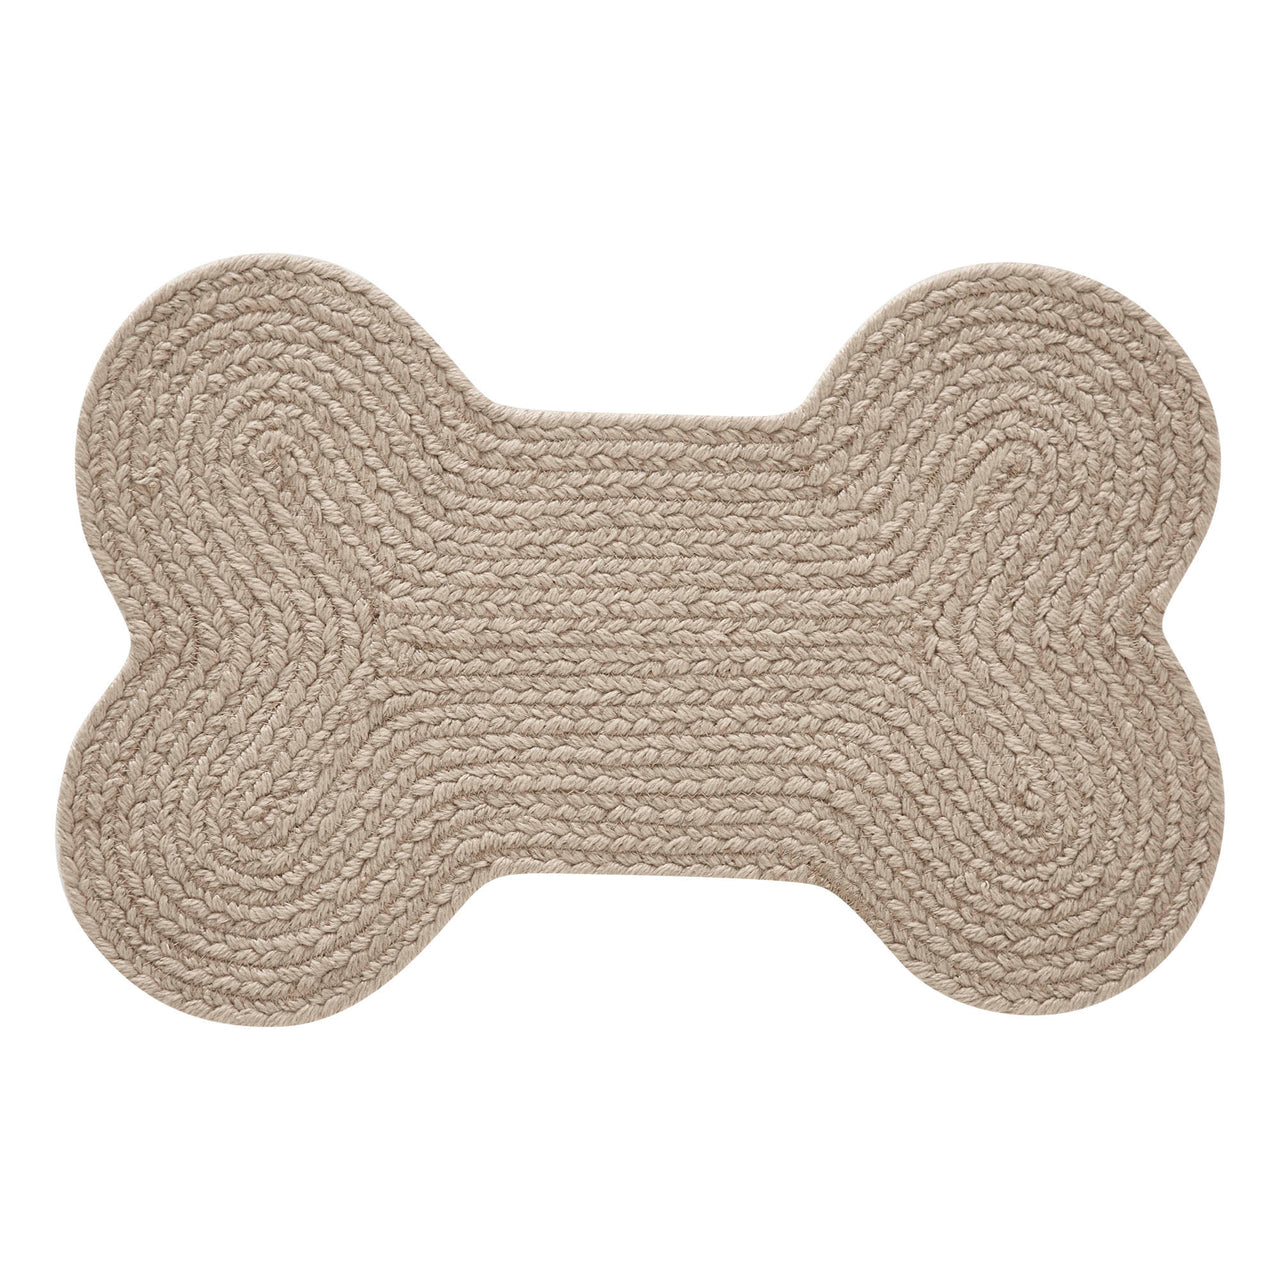 Natural Indoor/Outdoor Small Bone Braided Rug 11.5"x17.5" VHC Brands